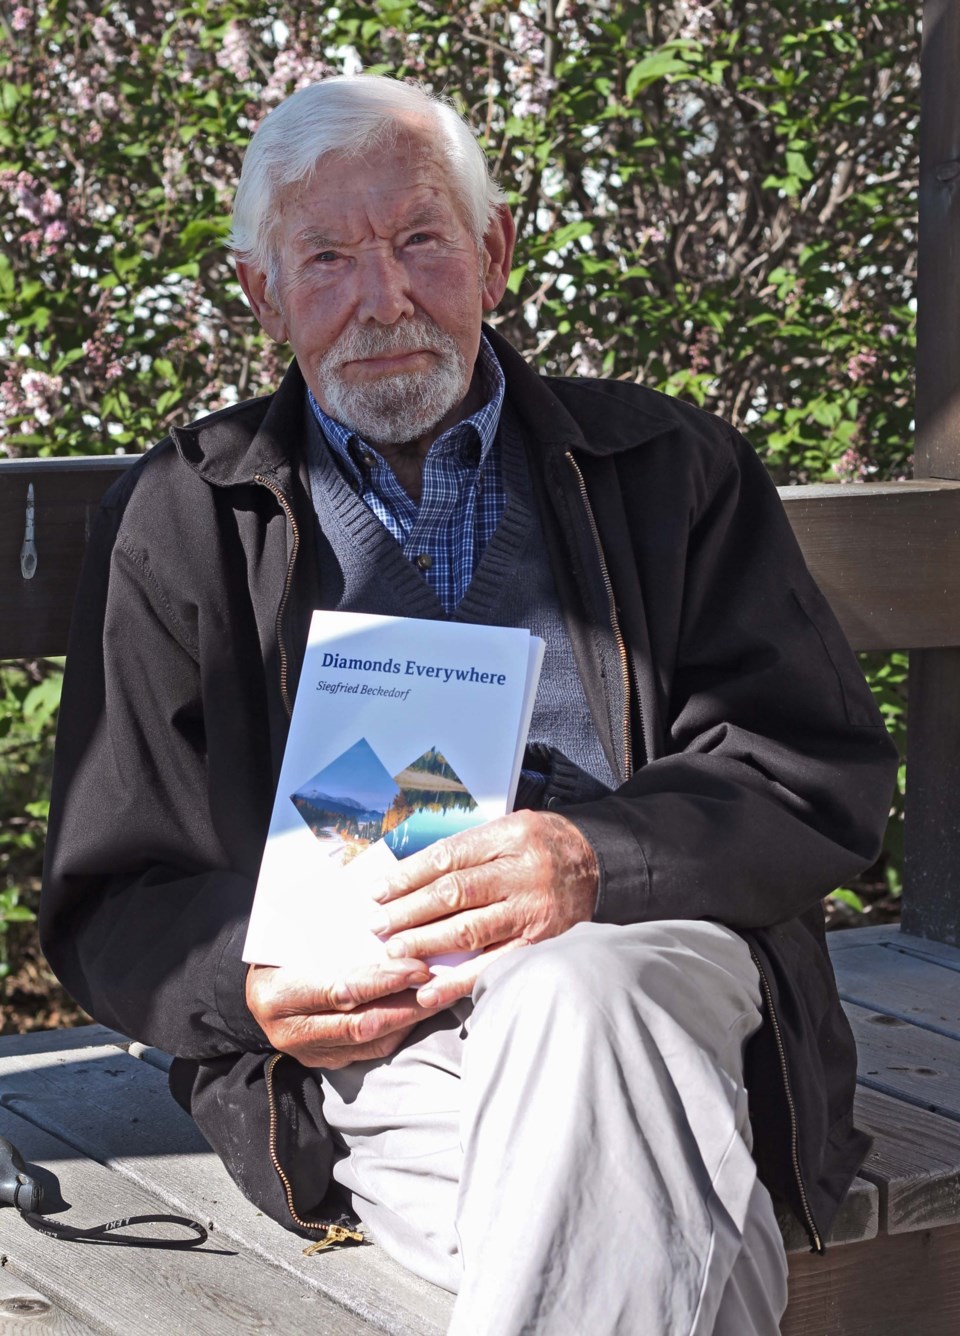 Siegfreid Beckedorf poses with his book, Diamonds Everywhere. The book is an autobiography dedicated to his late wife Ursula.